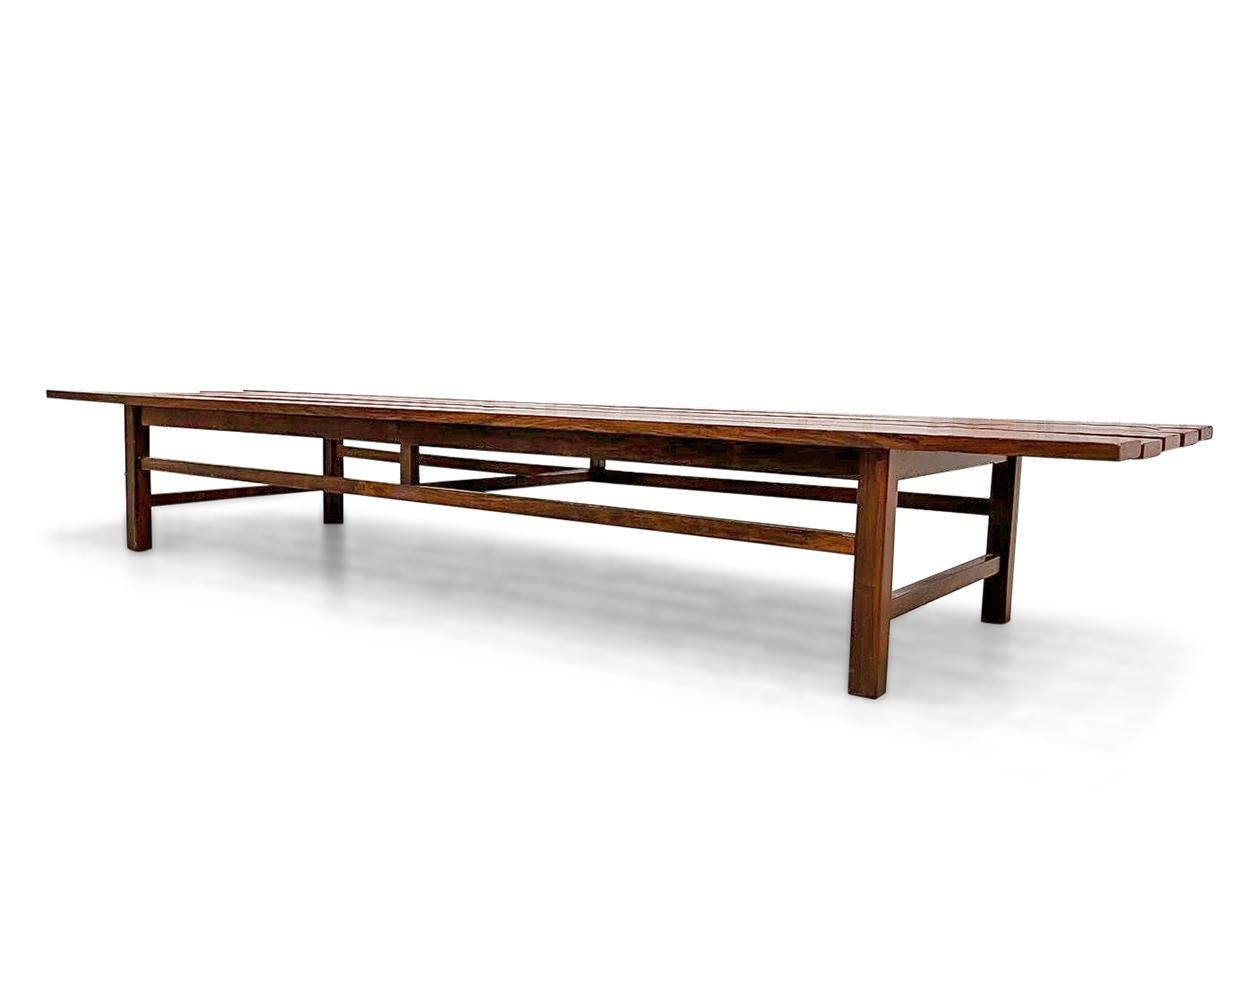 This bench is made with Brazilian rosewood (also known as jacaranda) and it has a stunning tone with natural wood grain. In addition, the wood has been refinished and is now in excellent condition. The bench can fit 4 people comfortably and features